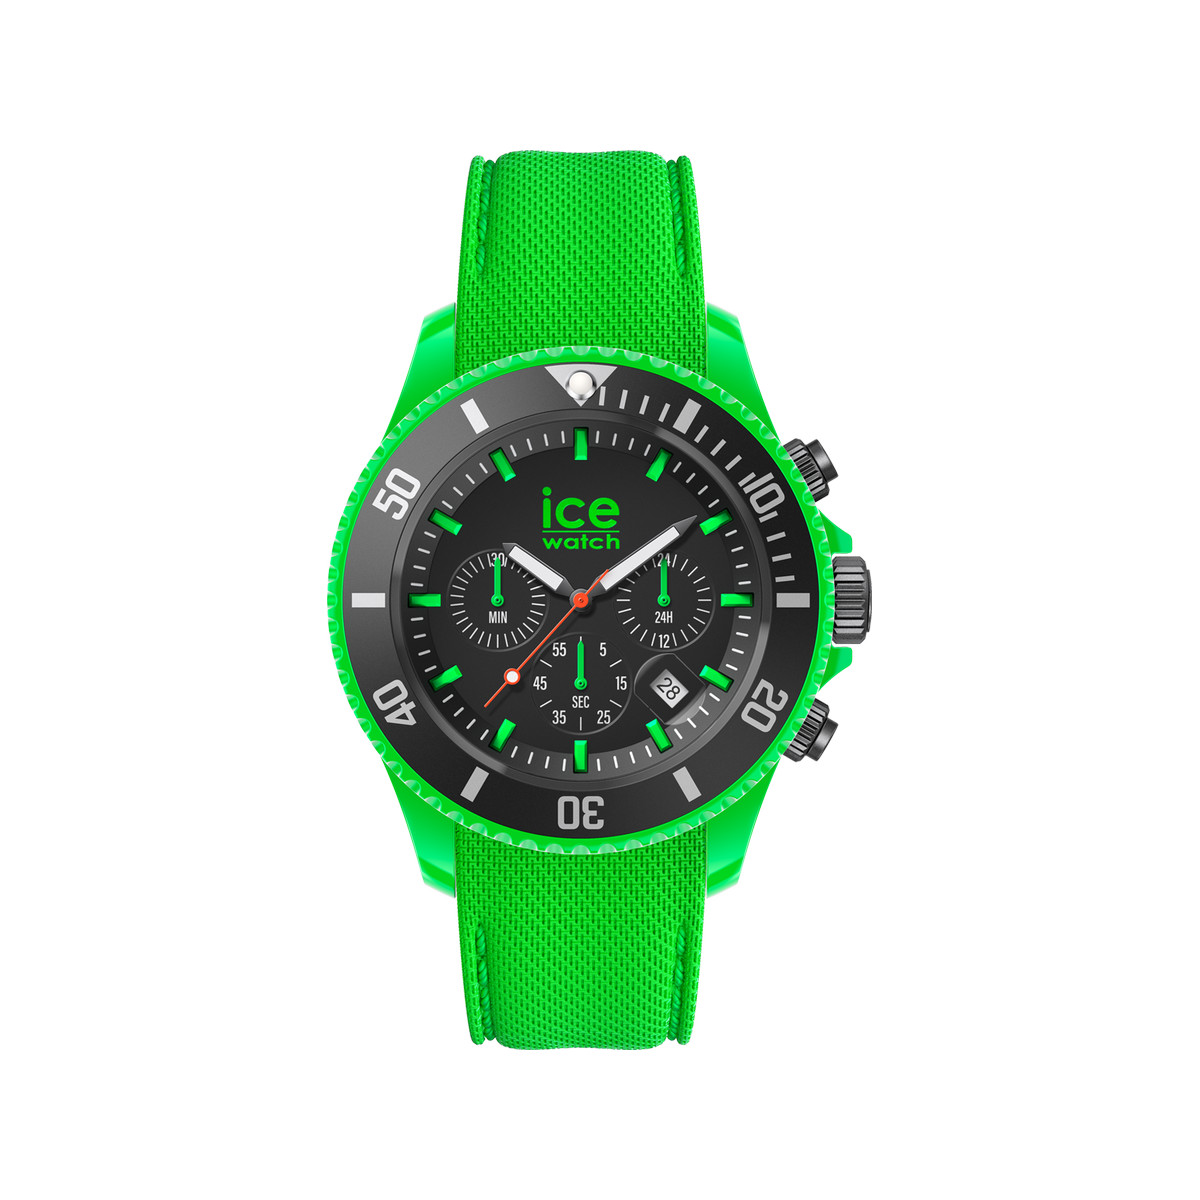 Montre Ice Watch Chrono Homme silicone vert fluo